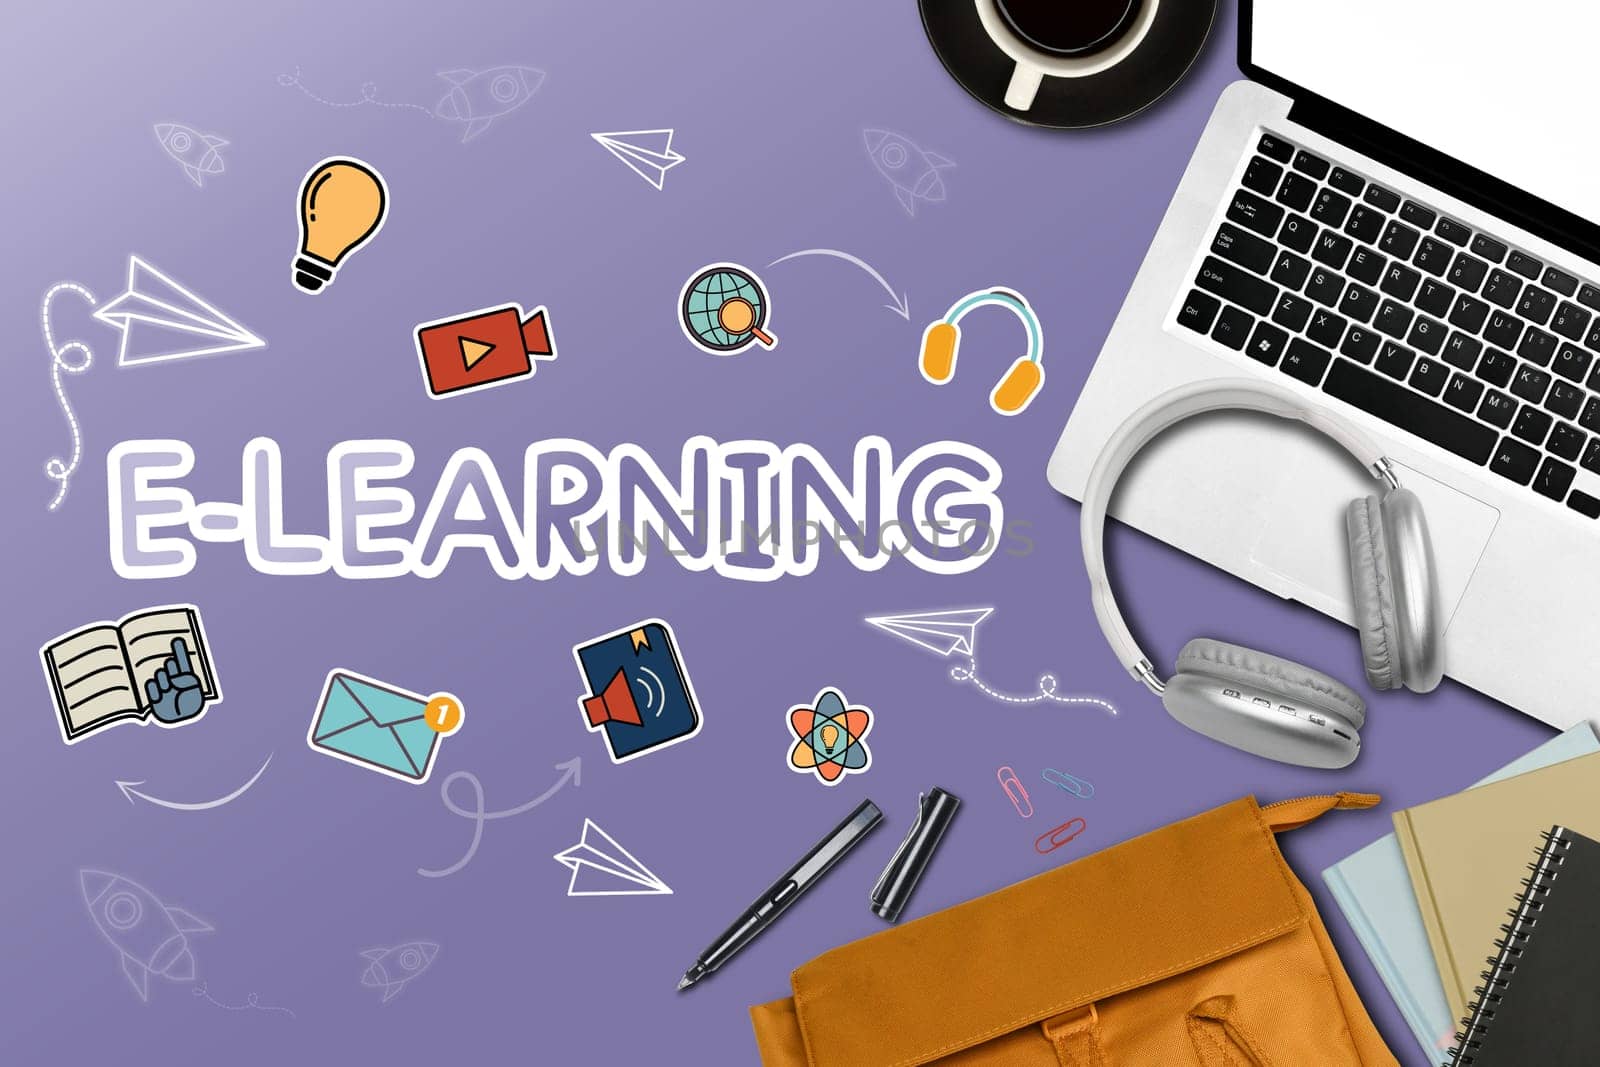 Laptop, headphone and backpack on purple background with word e-learning.